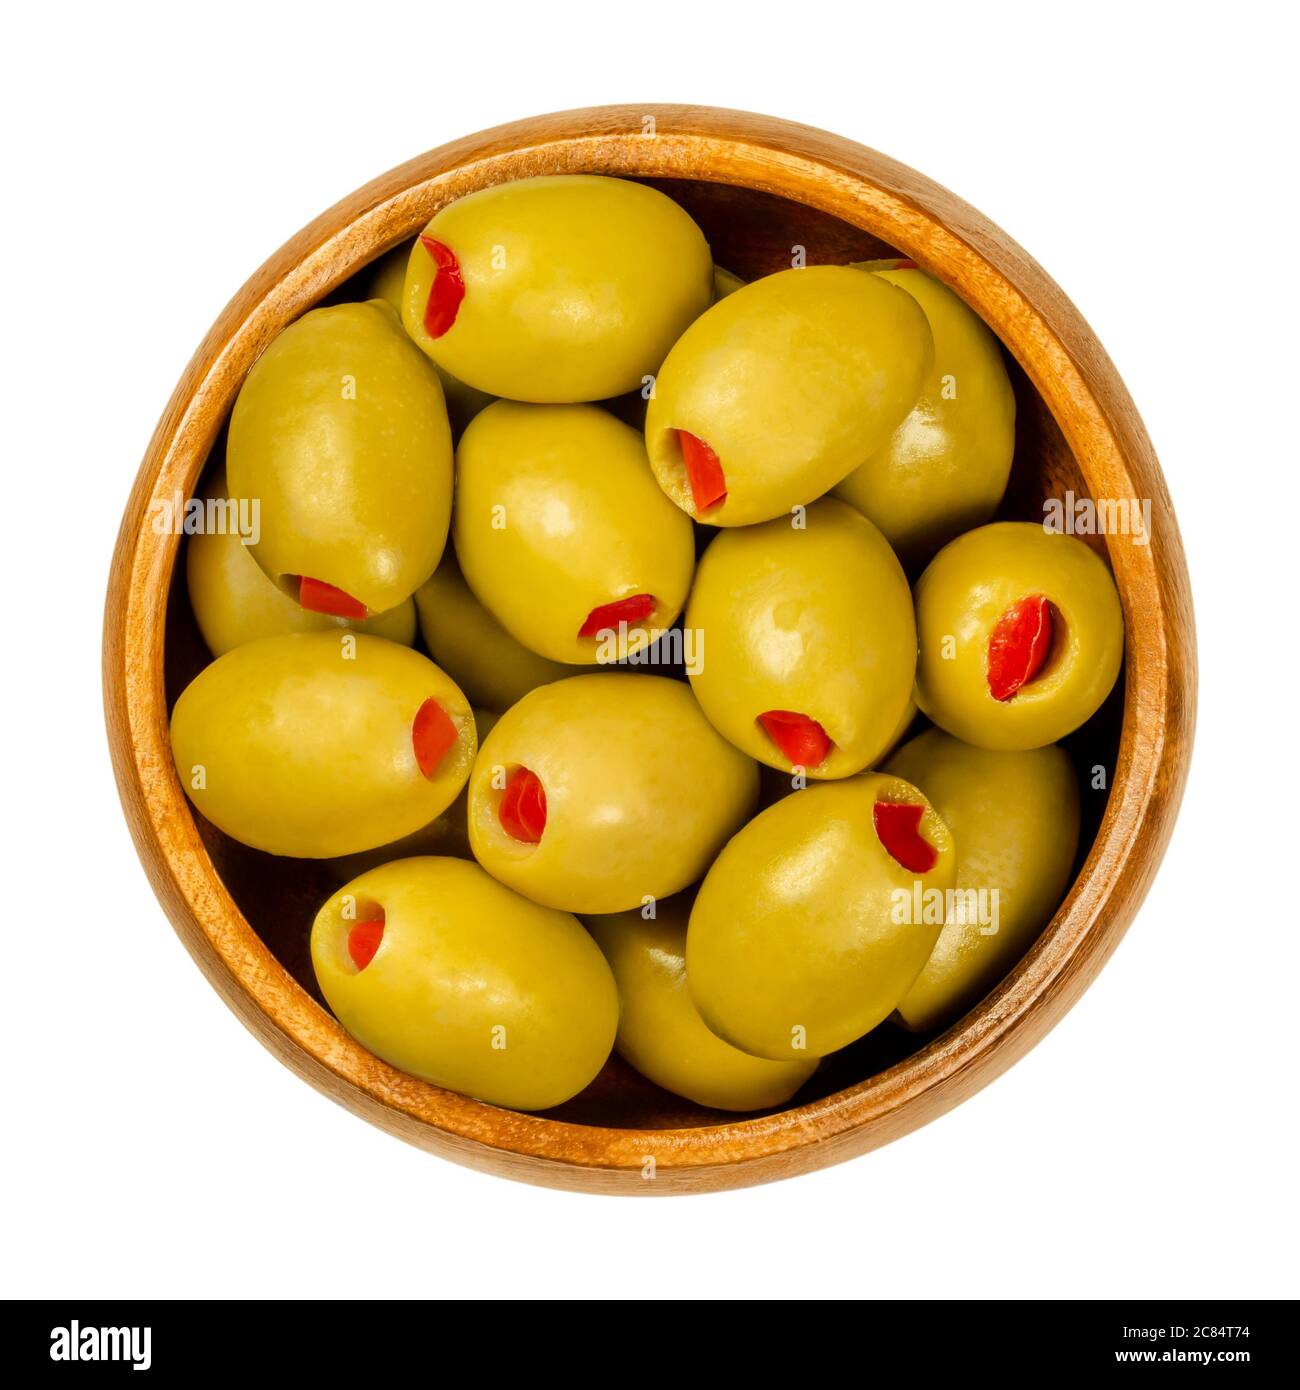 Sweet pepper stuffed green olives in wooden bowl. Big European olives, fruits of Olea europaea, filled with pickled red bell pepper slices. Stock Photo